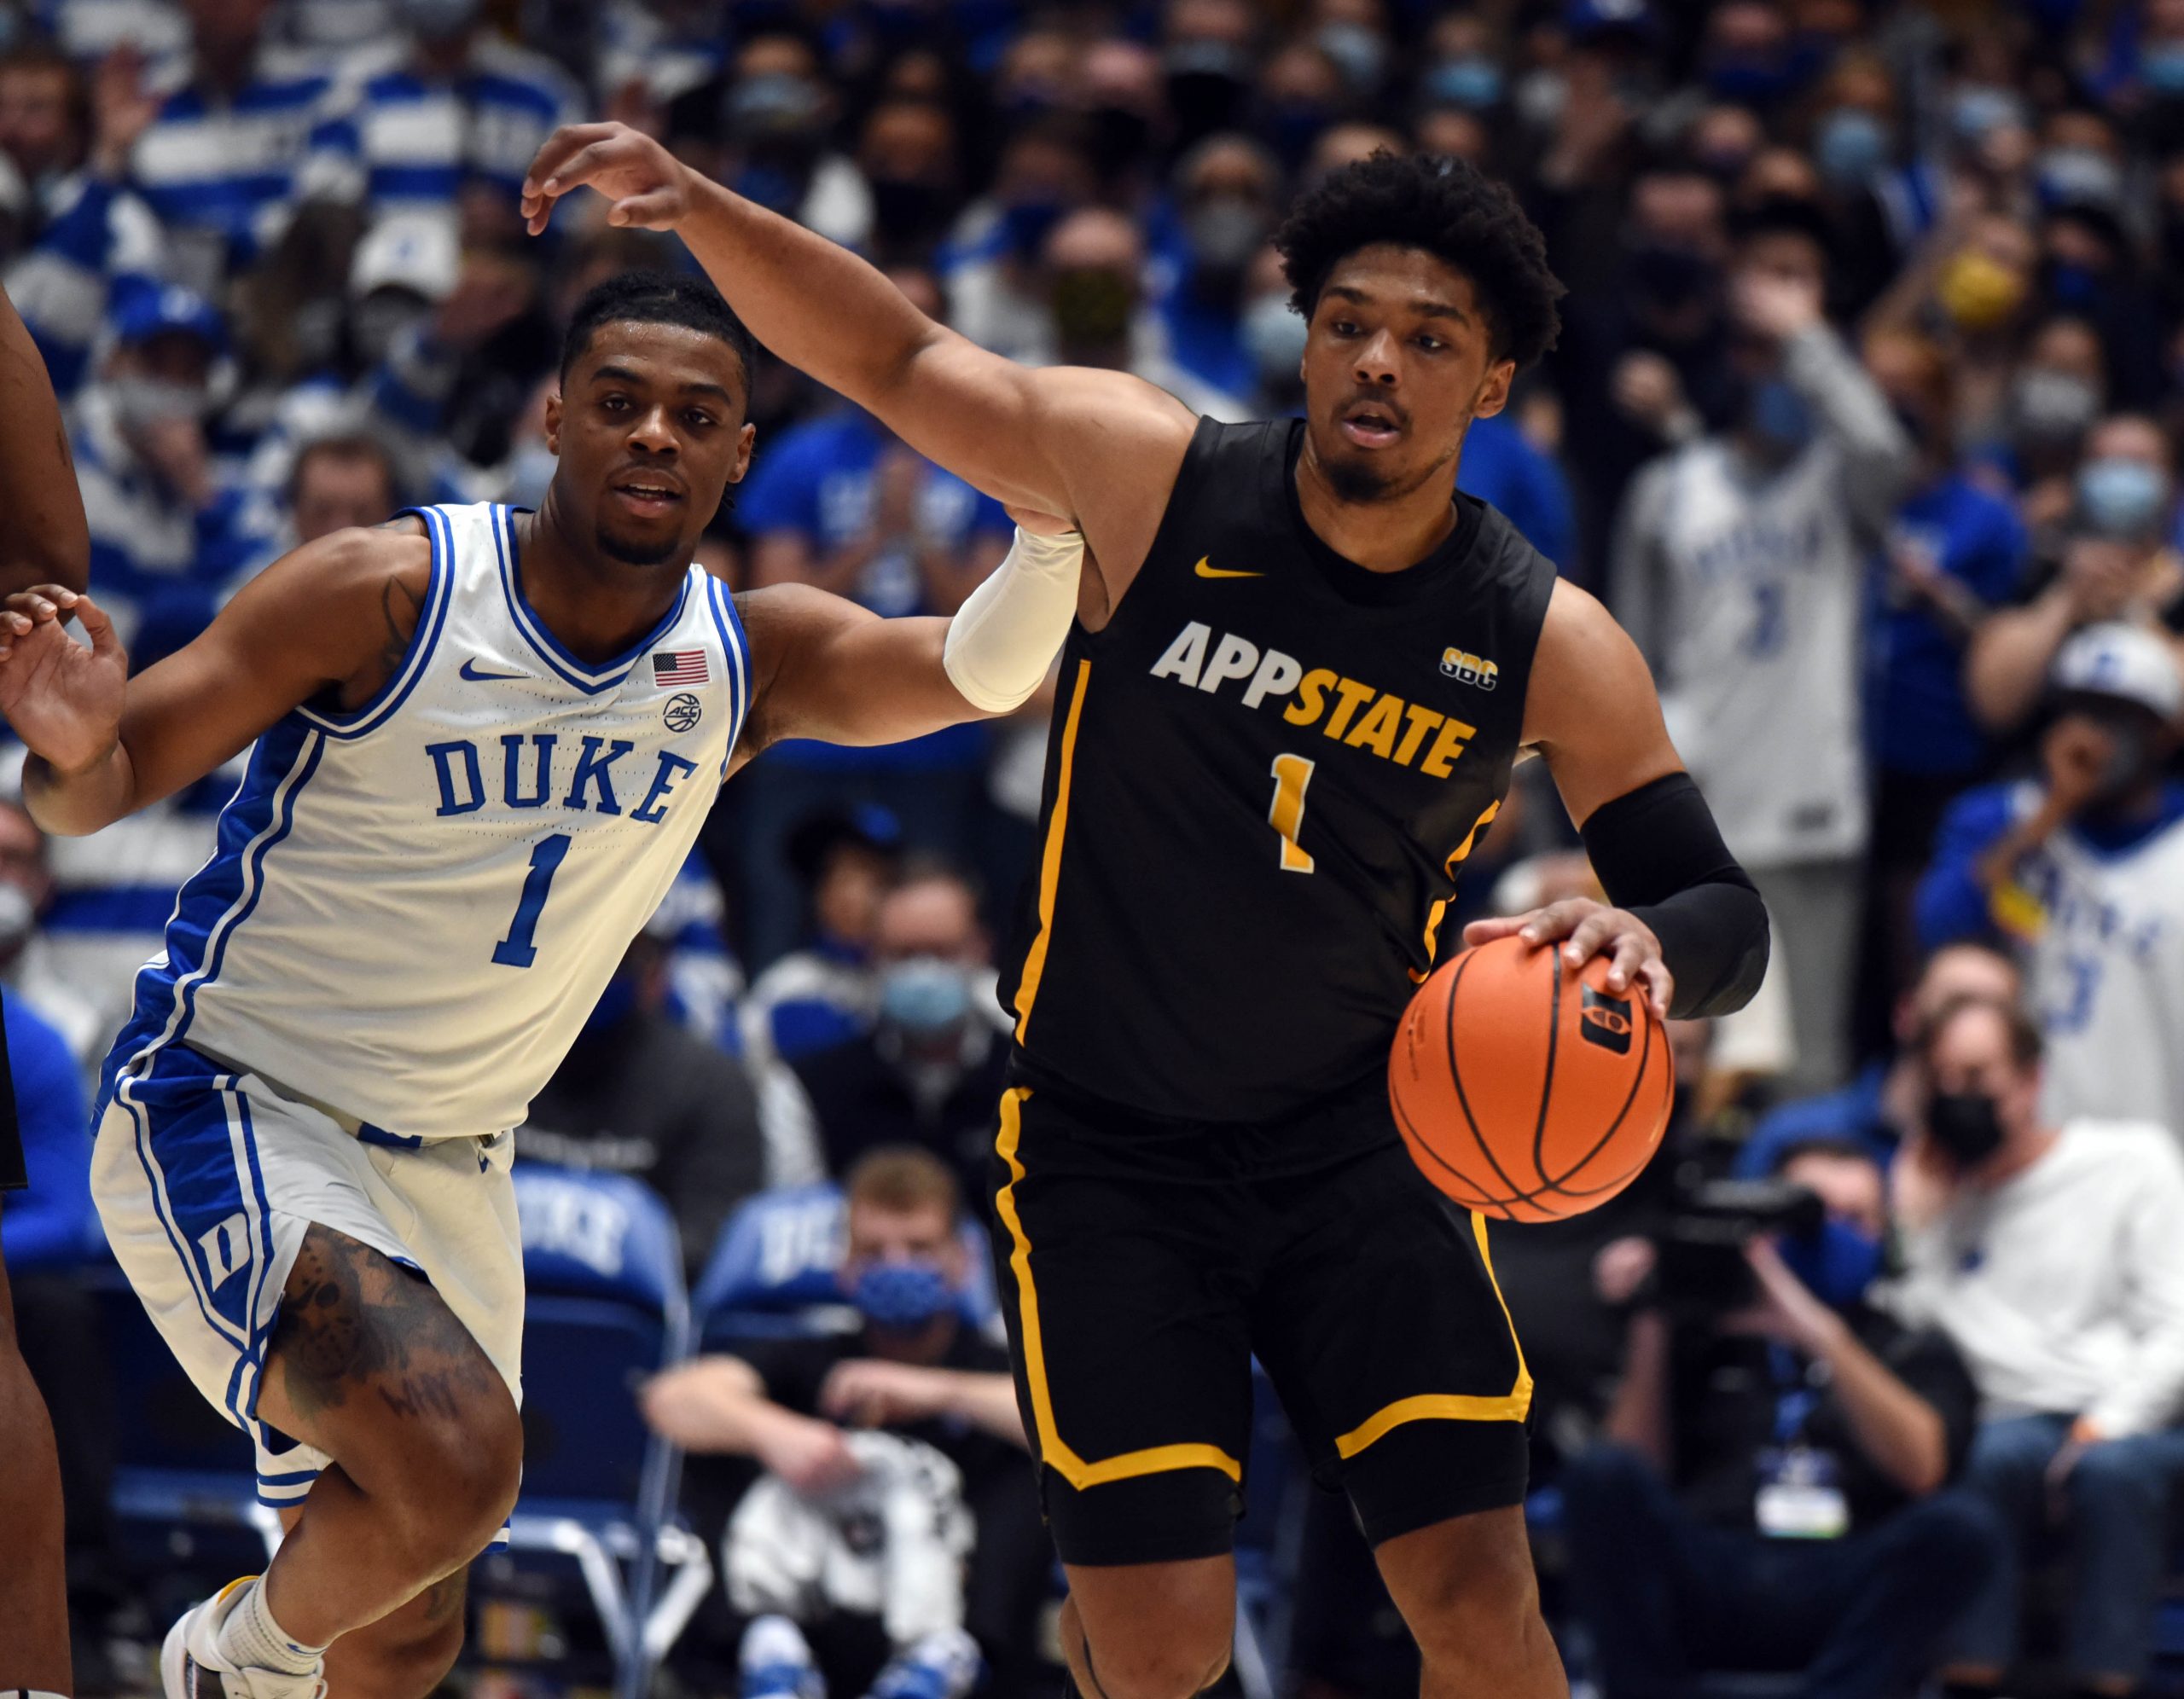 Appalachian State Mountaineers guard Justin Forrest (1) dribbles up court as Duke Blue Devils guard Trevor Keels (1) defends during the first half at Cameron Indoor Stadium